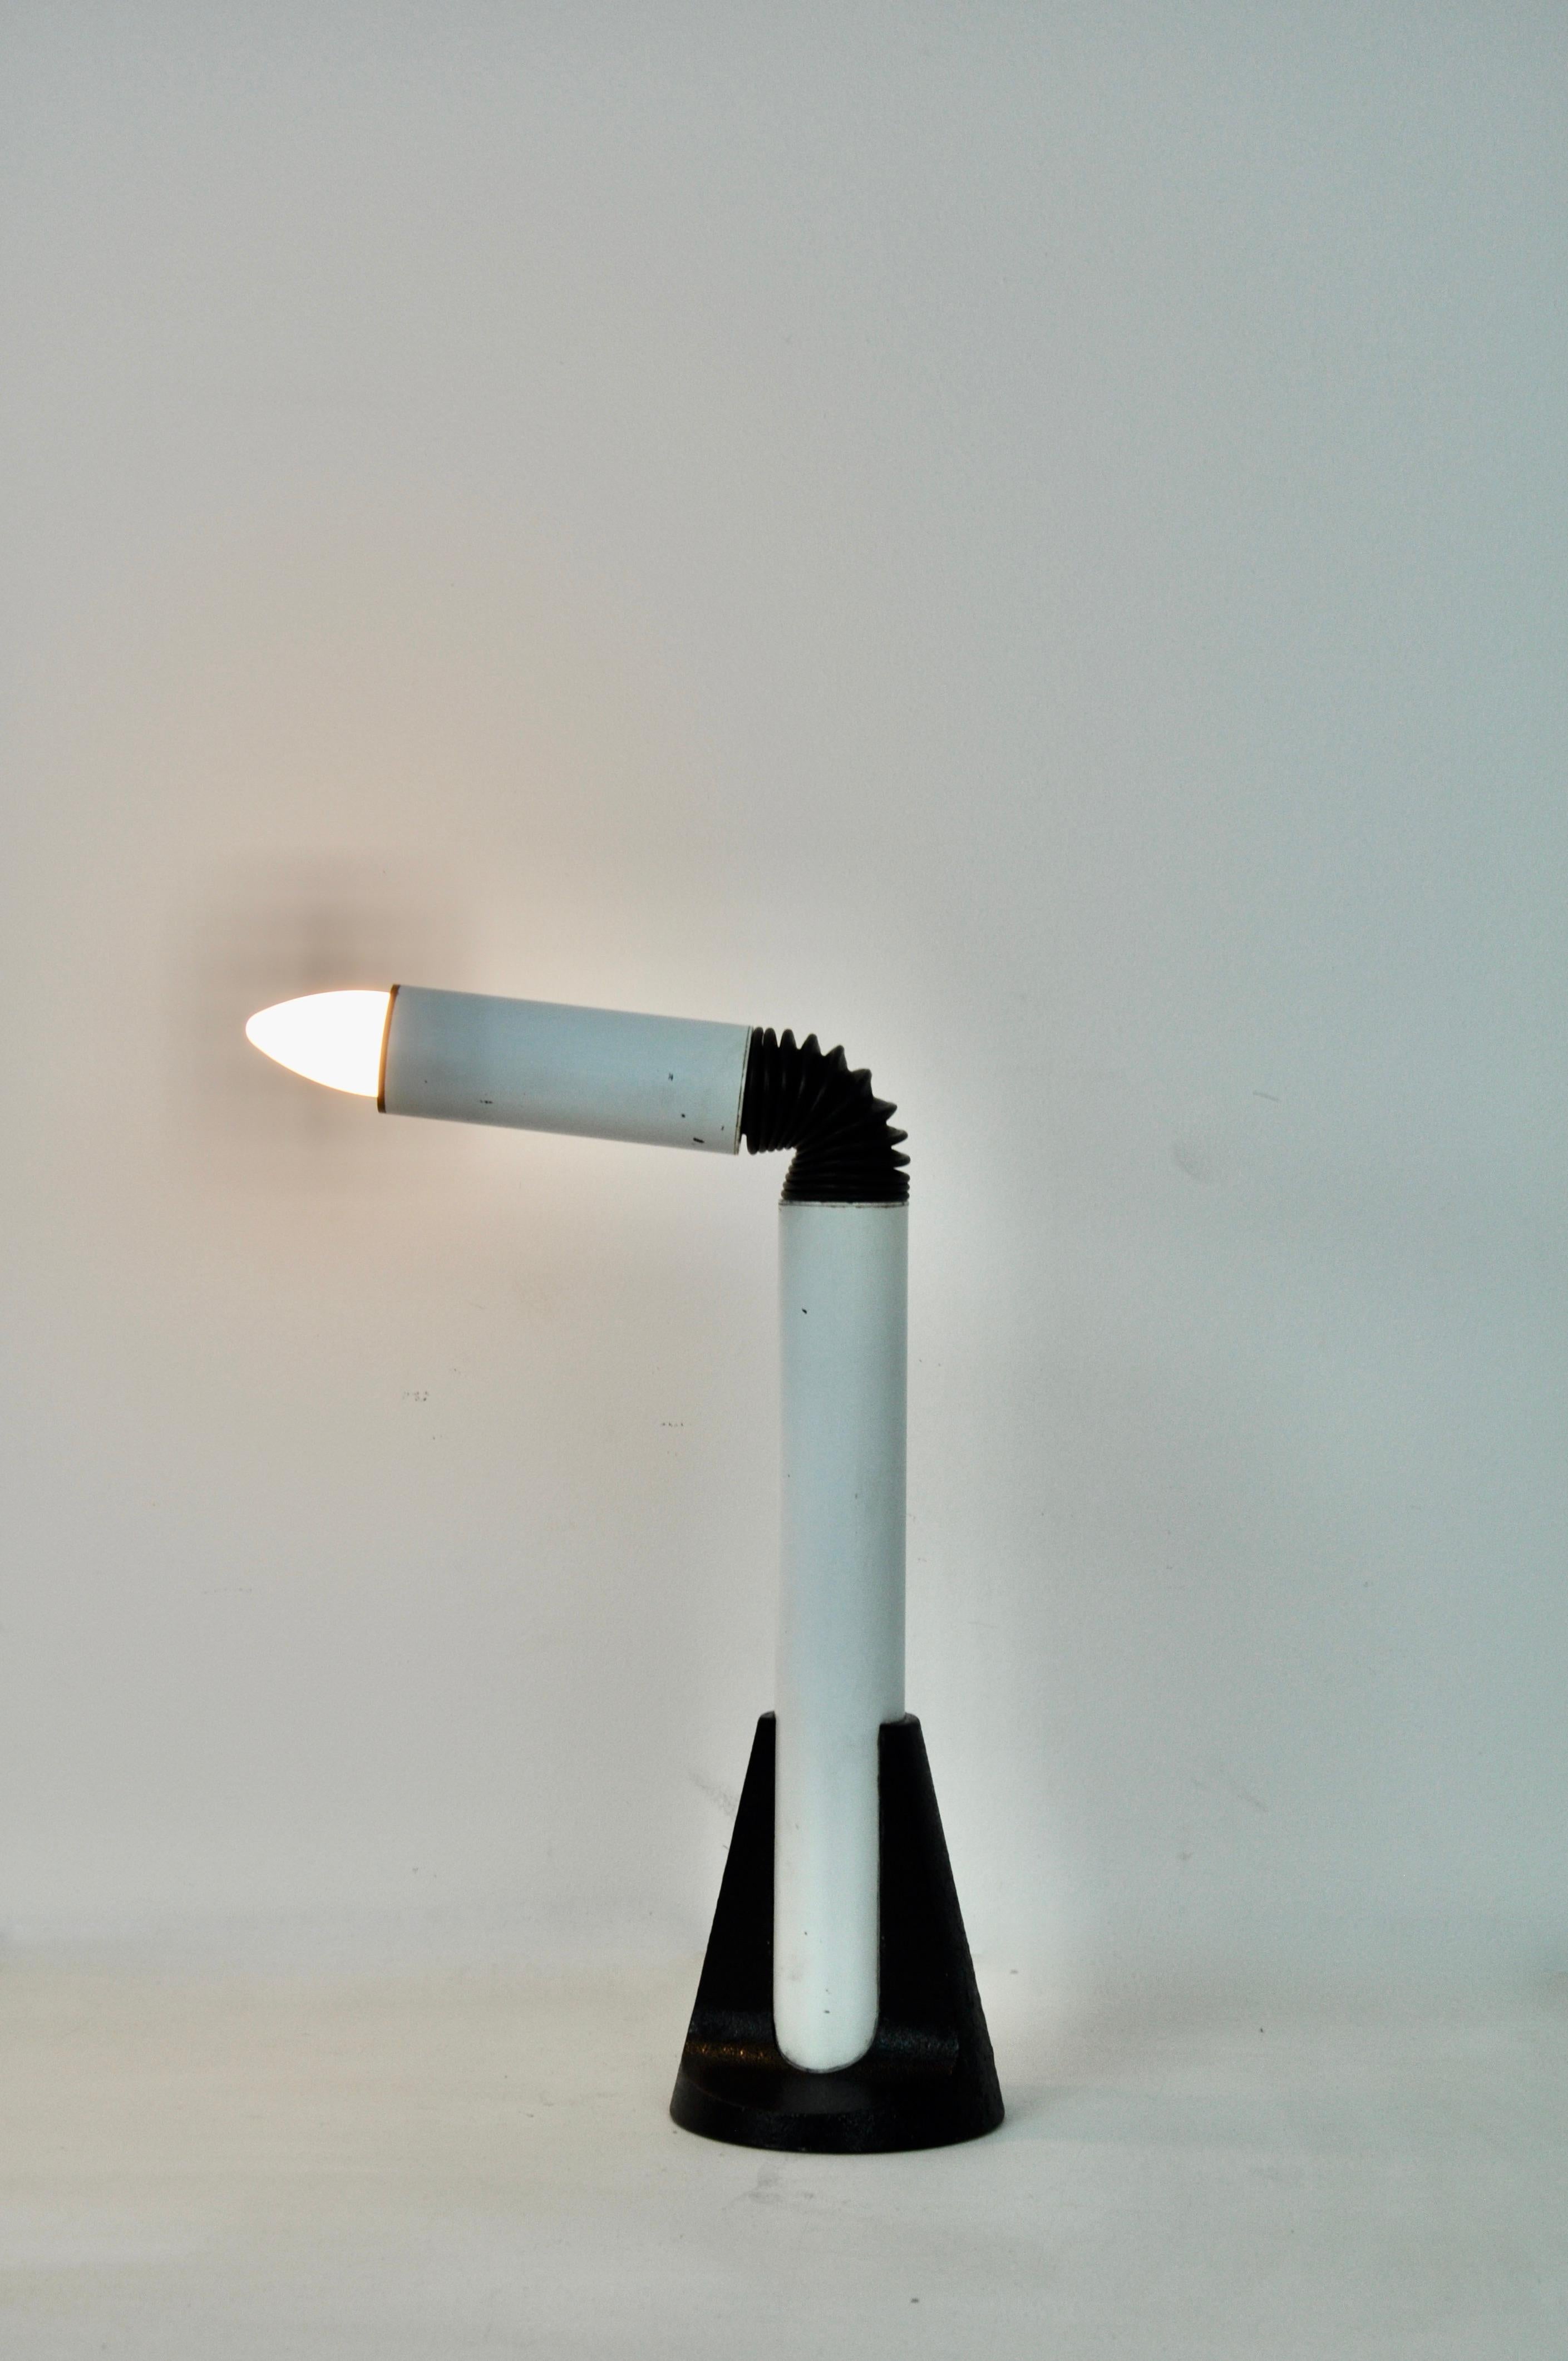 Metal lamp in white and black color. Wear due to time and age of the lamp (see photo).